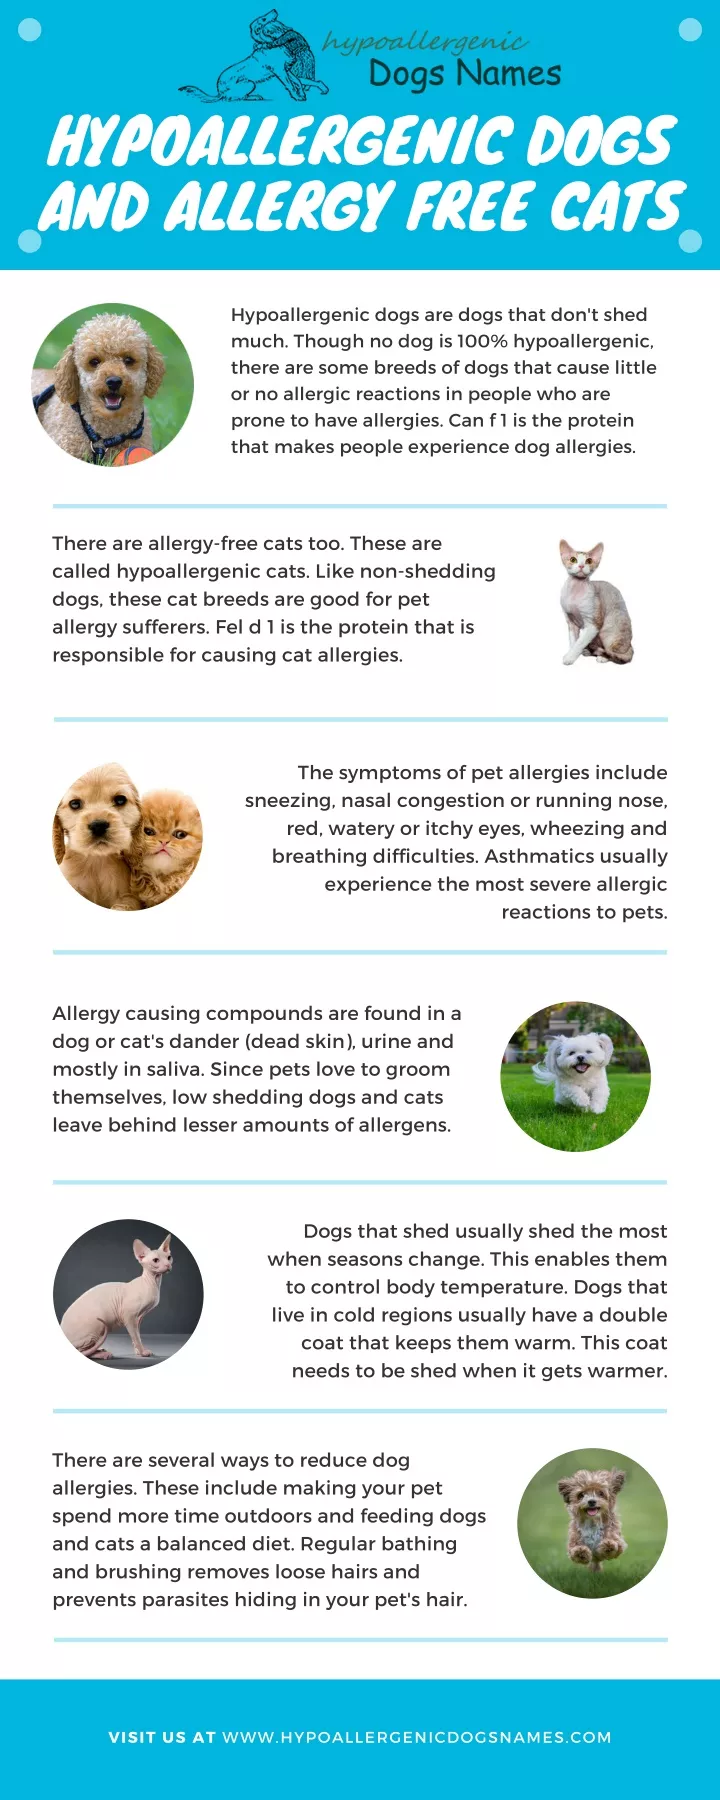 hypoallergenic dogs and allergy free cats